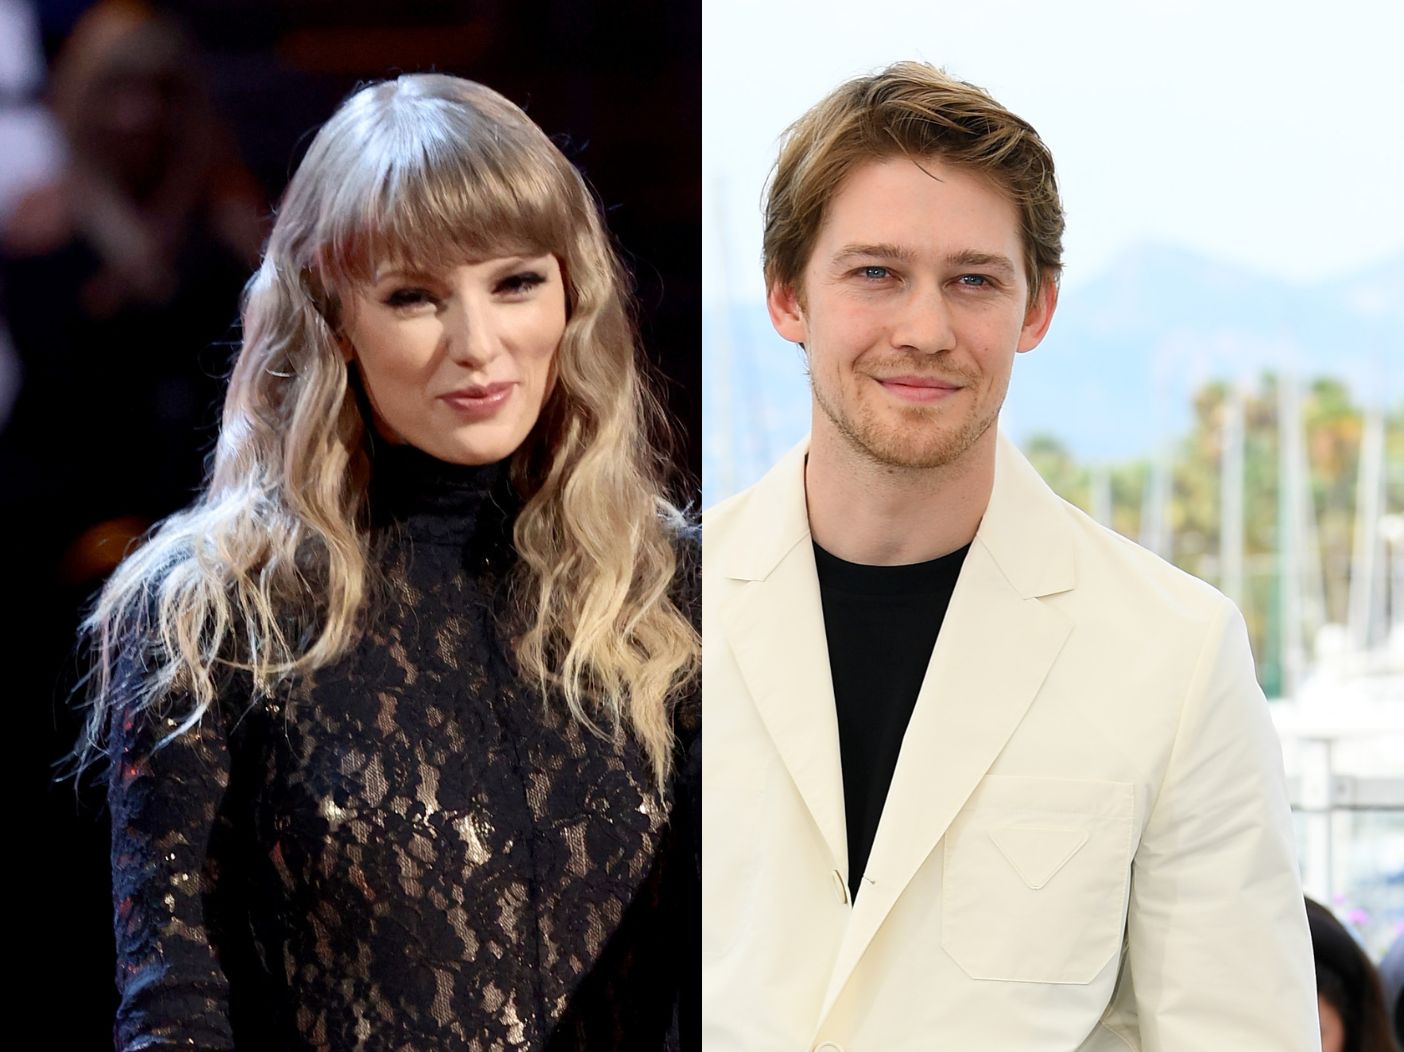 Sketchy Snitch Claims Taylor Swift Supposedly Refusing To Marry Joe Alwyn Any Time Soon